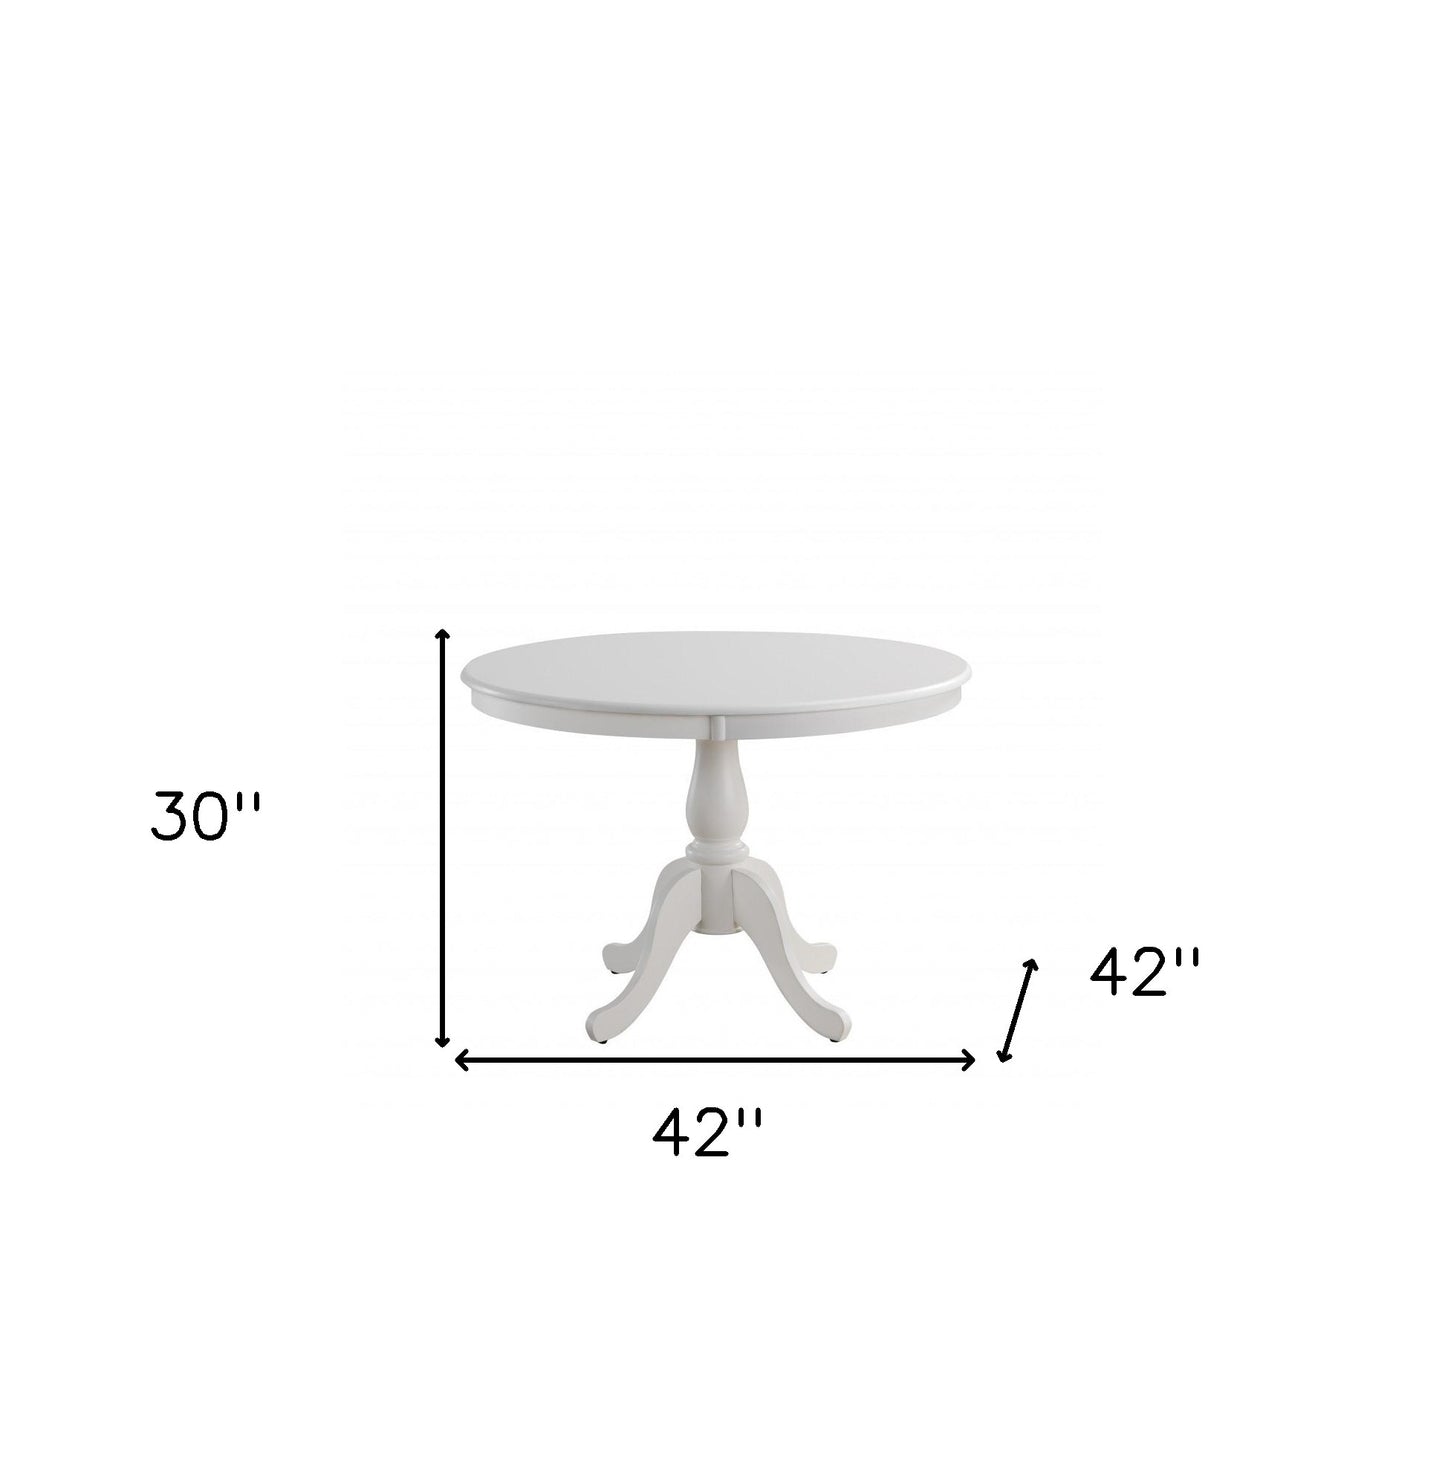 42" White Rounded Solid Manufactured Wood And Solid Wood Pedestal Base Dining Table